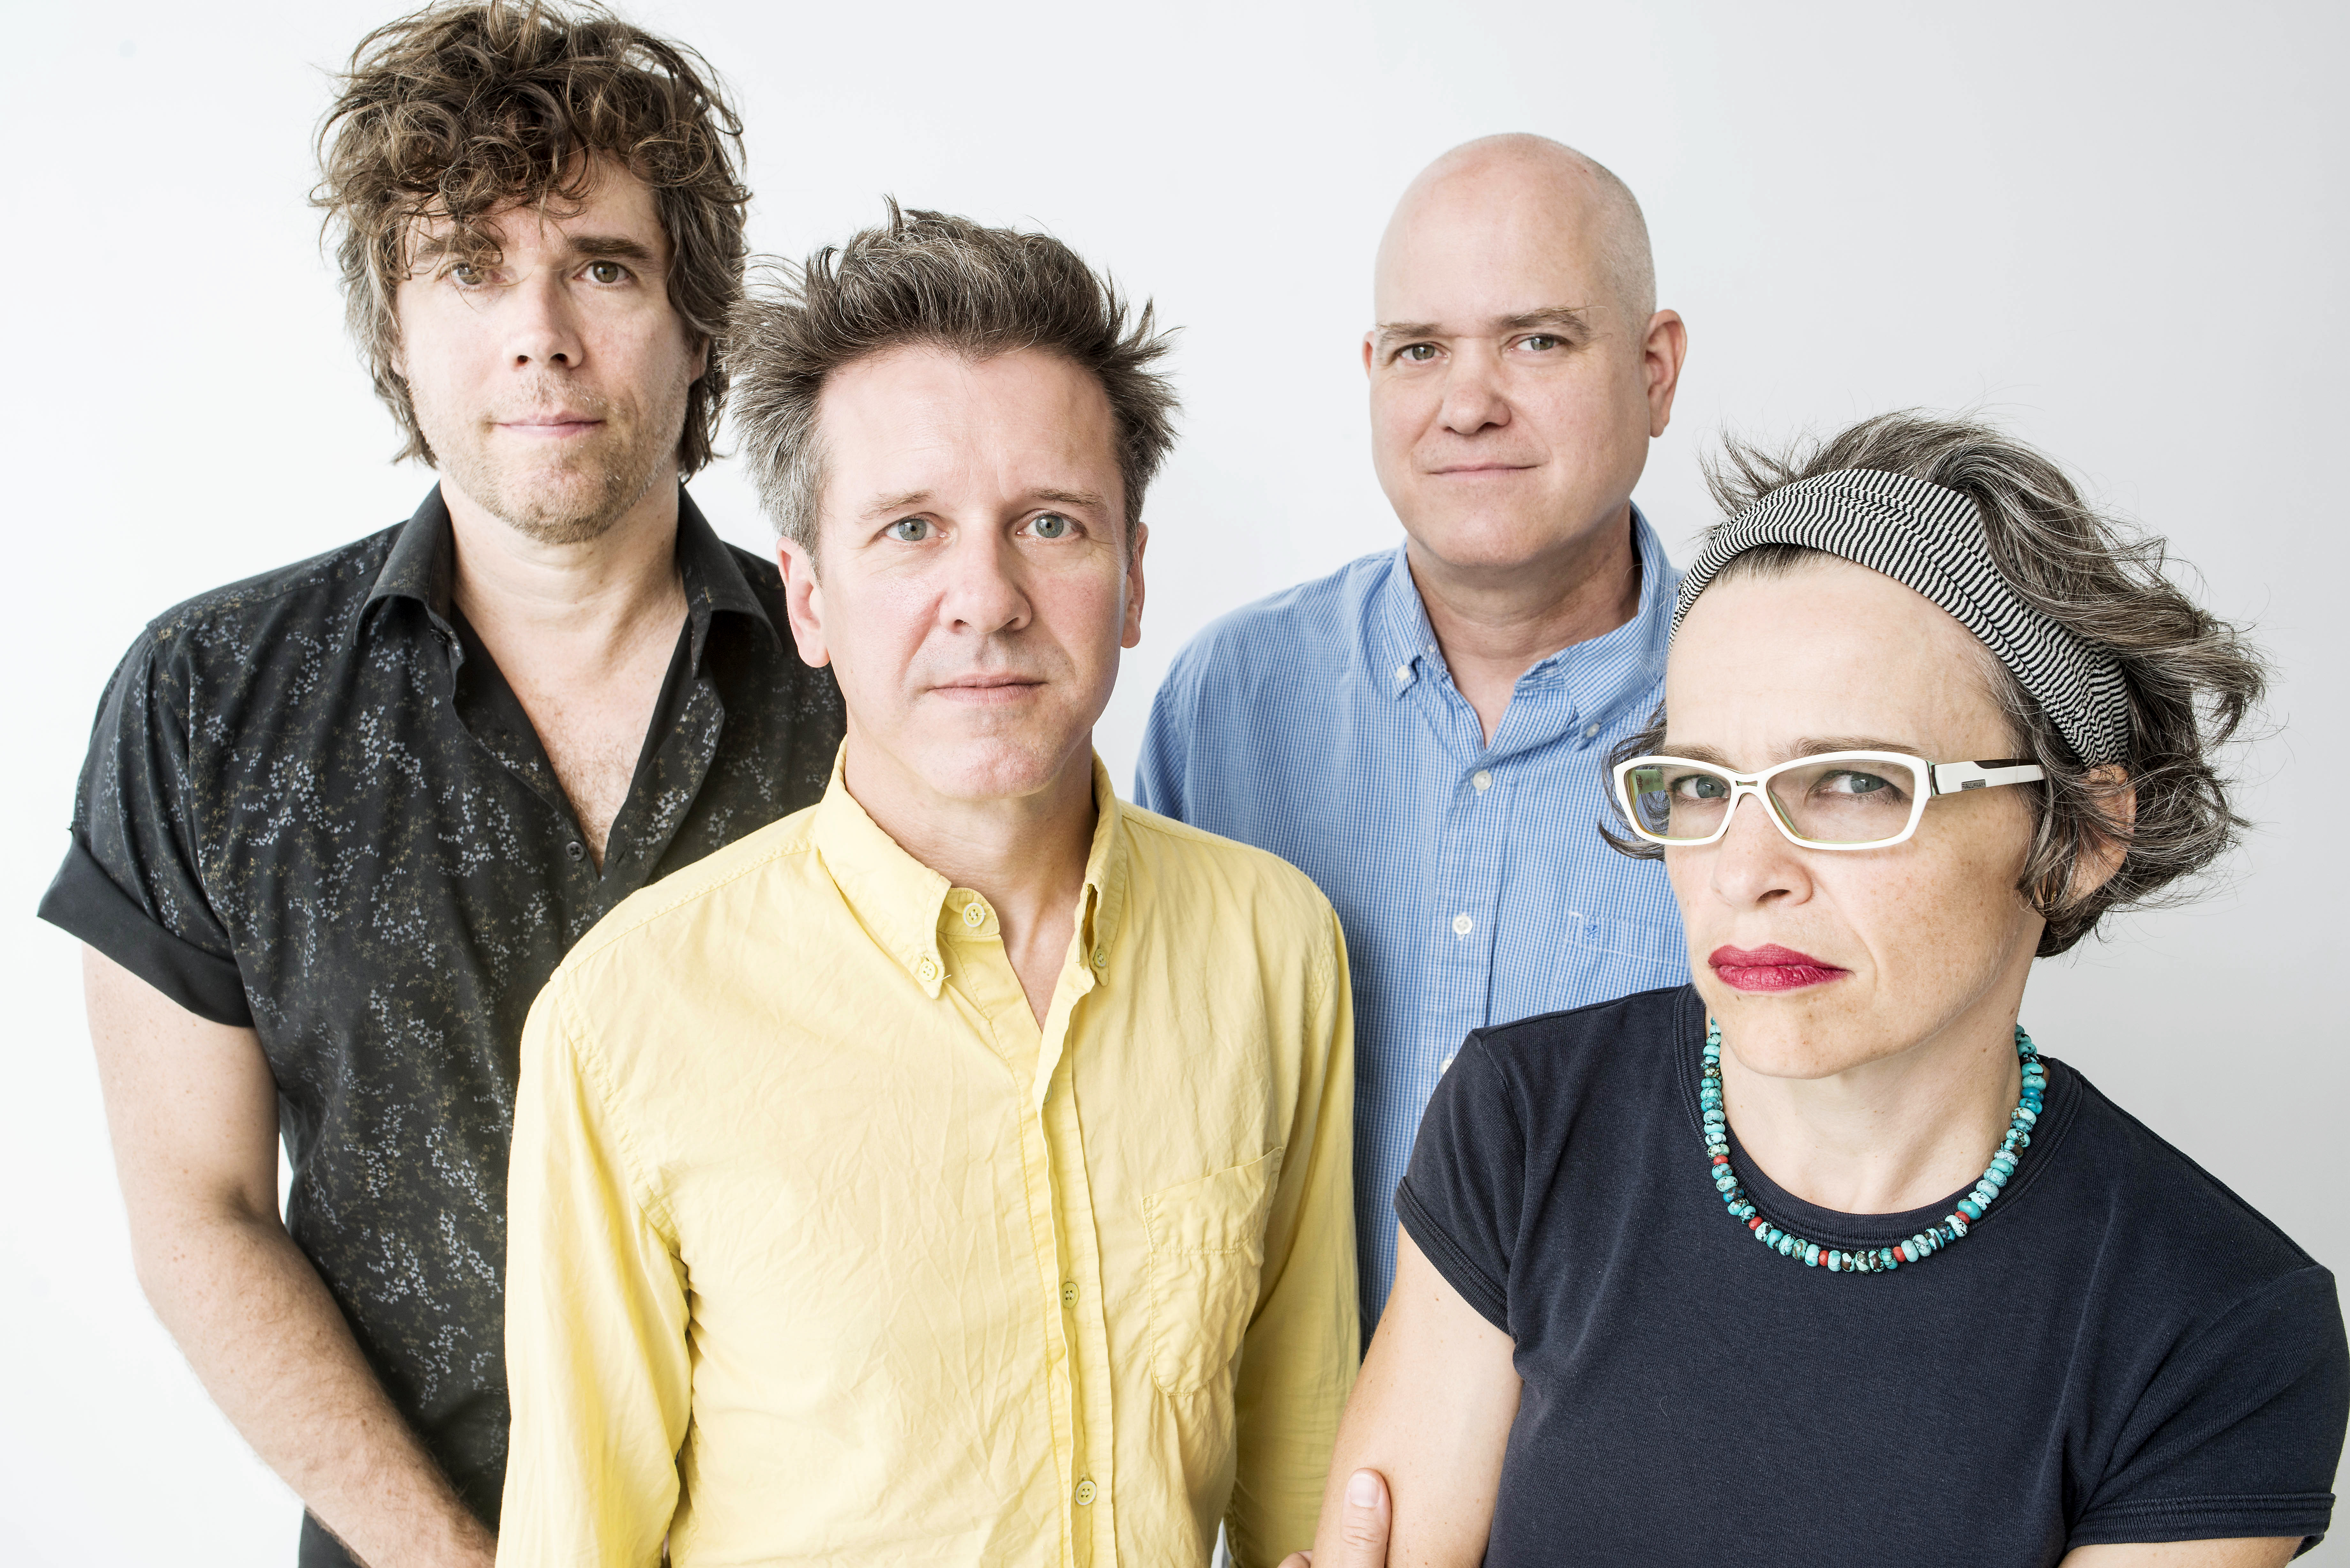 Superchunk's "What a Time to Be Alive" Handles the Turbulence with Confidence